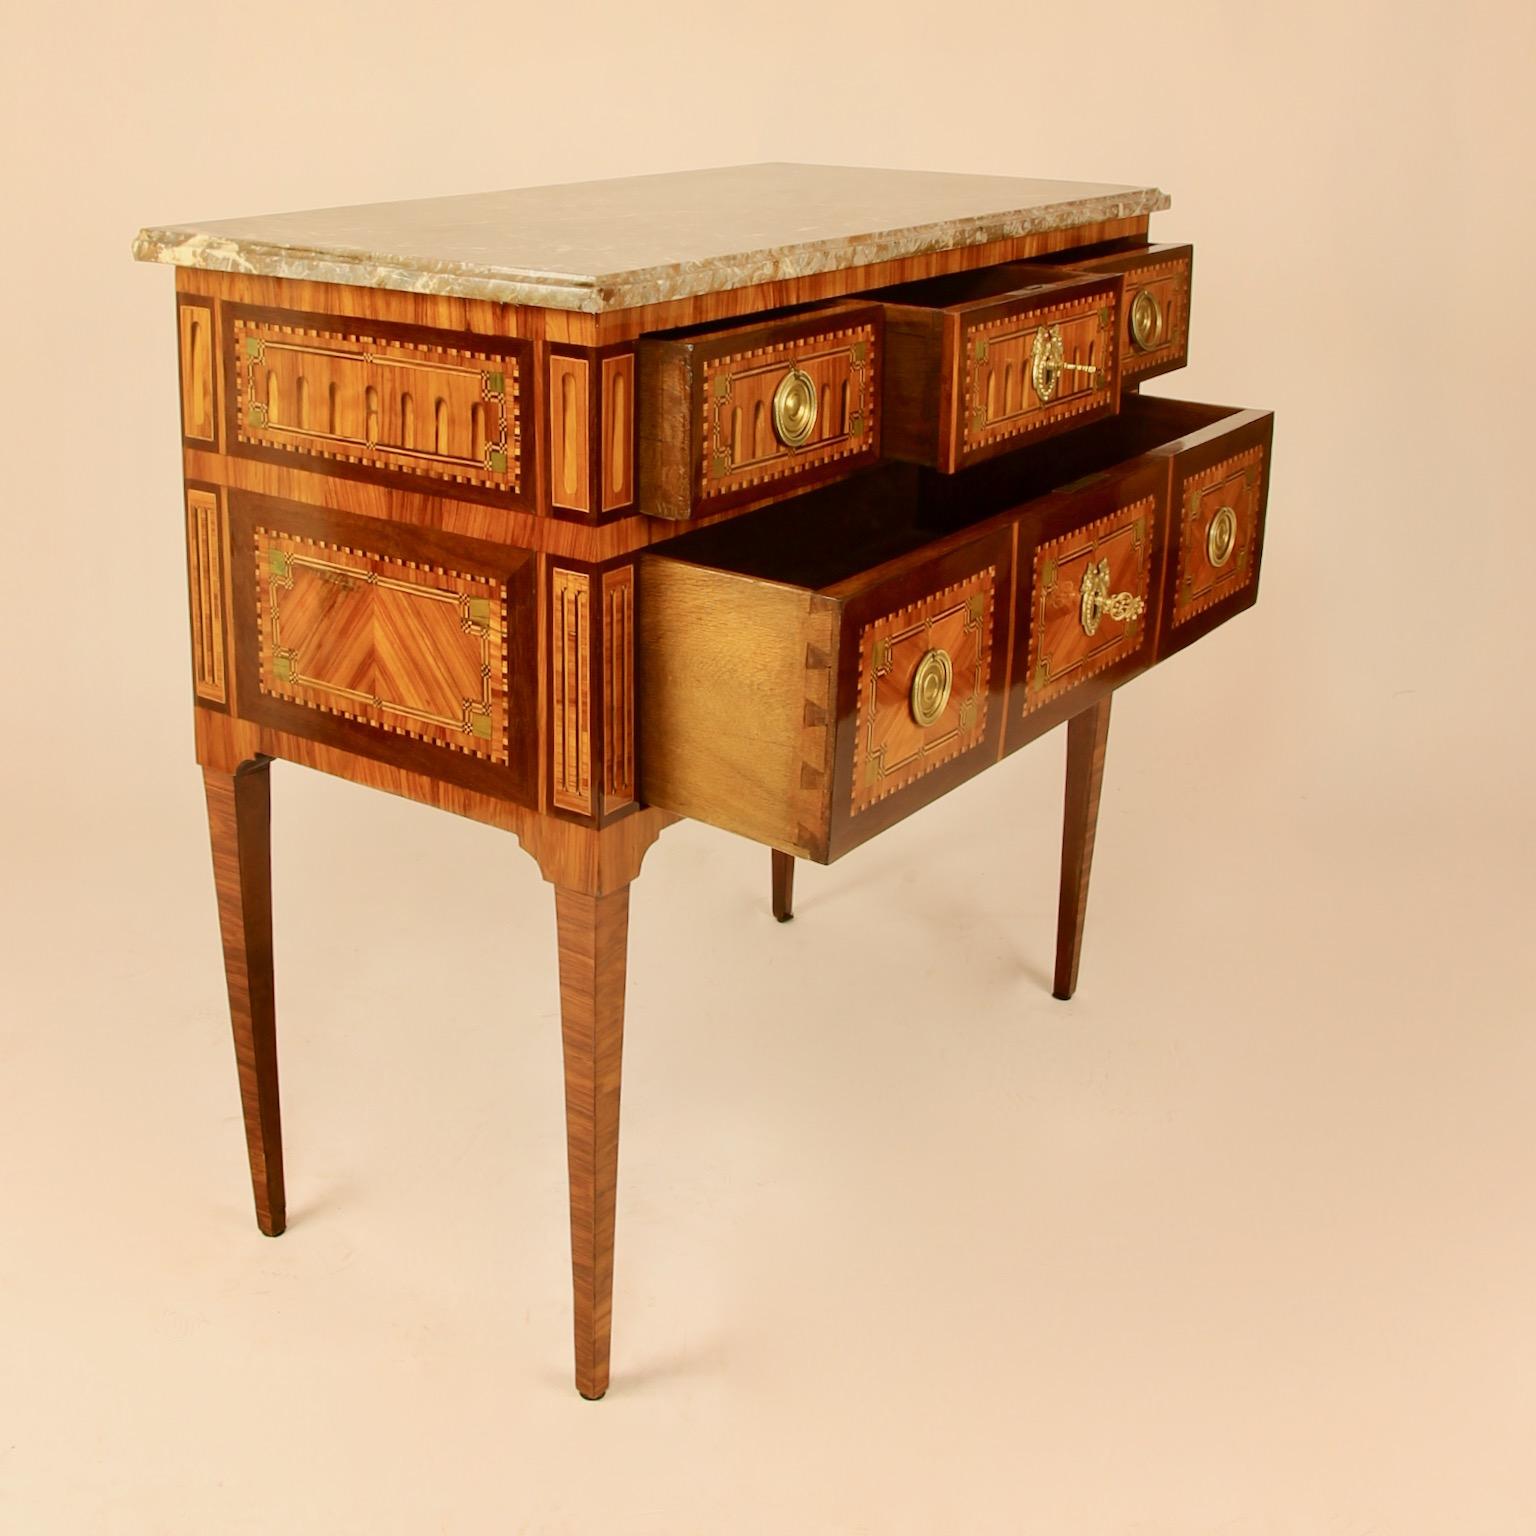 Bronze 18th Century Louis XVI Neoclassical Marquetry Commode or Chest of Drawers